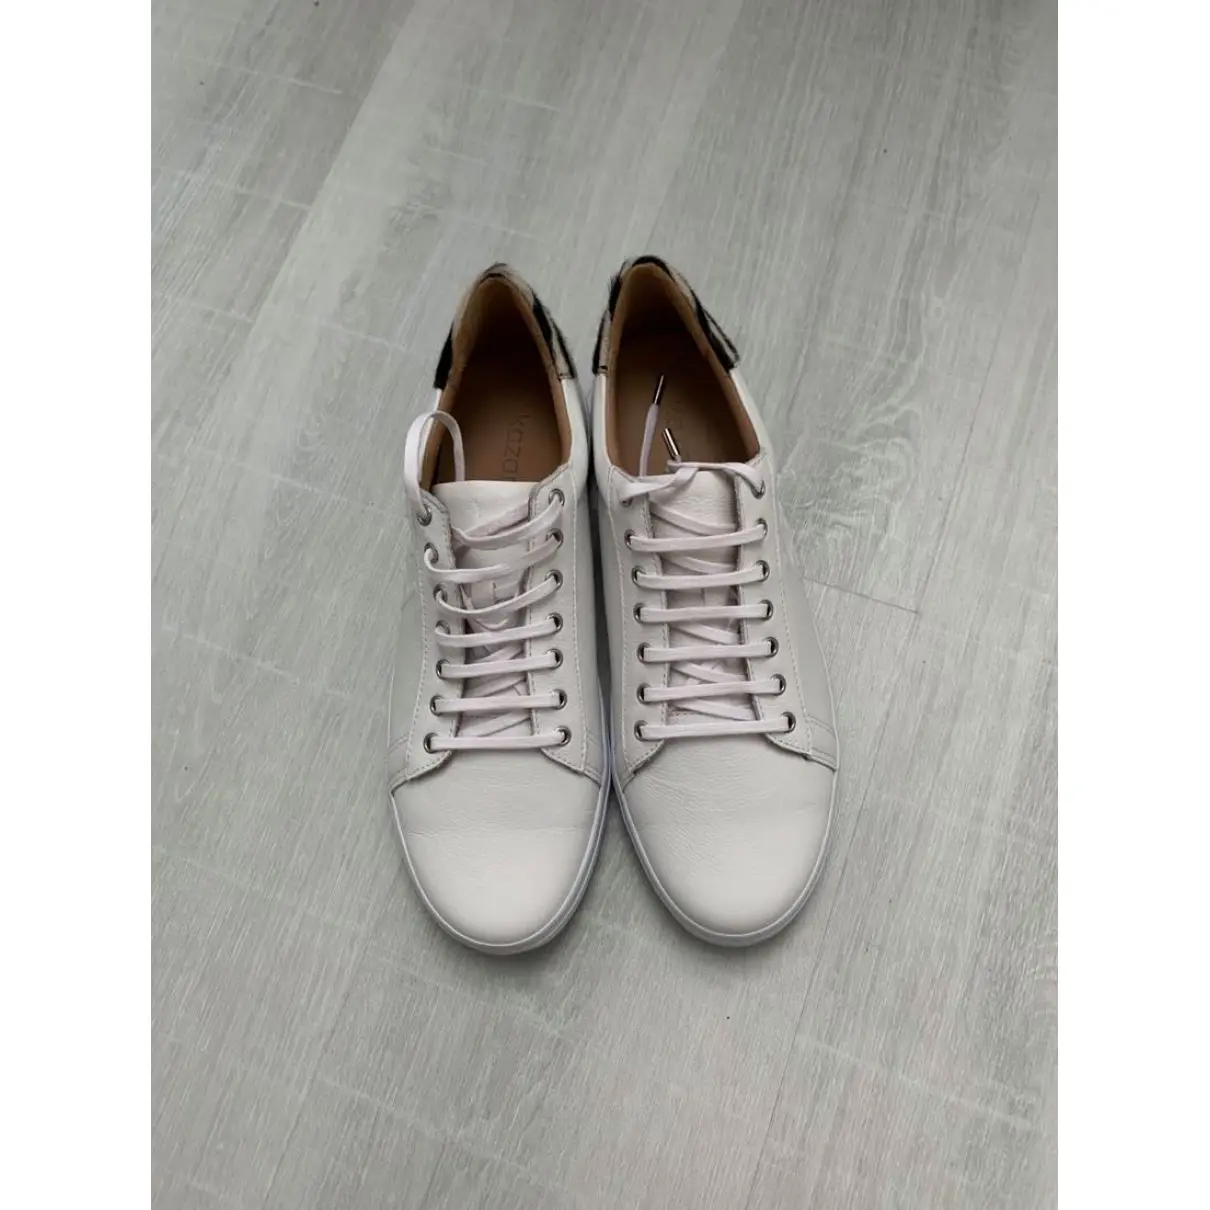 Buy Kazar Leather trainers online